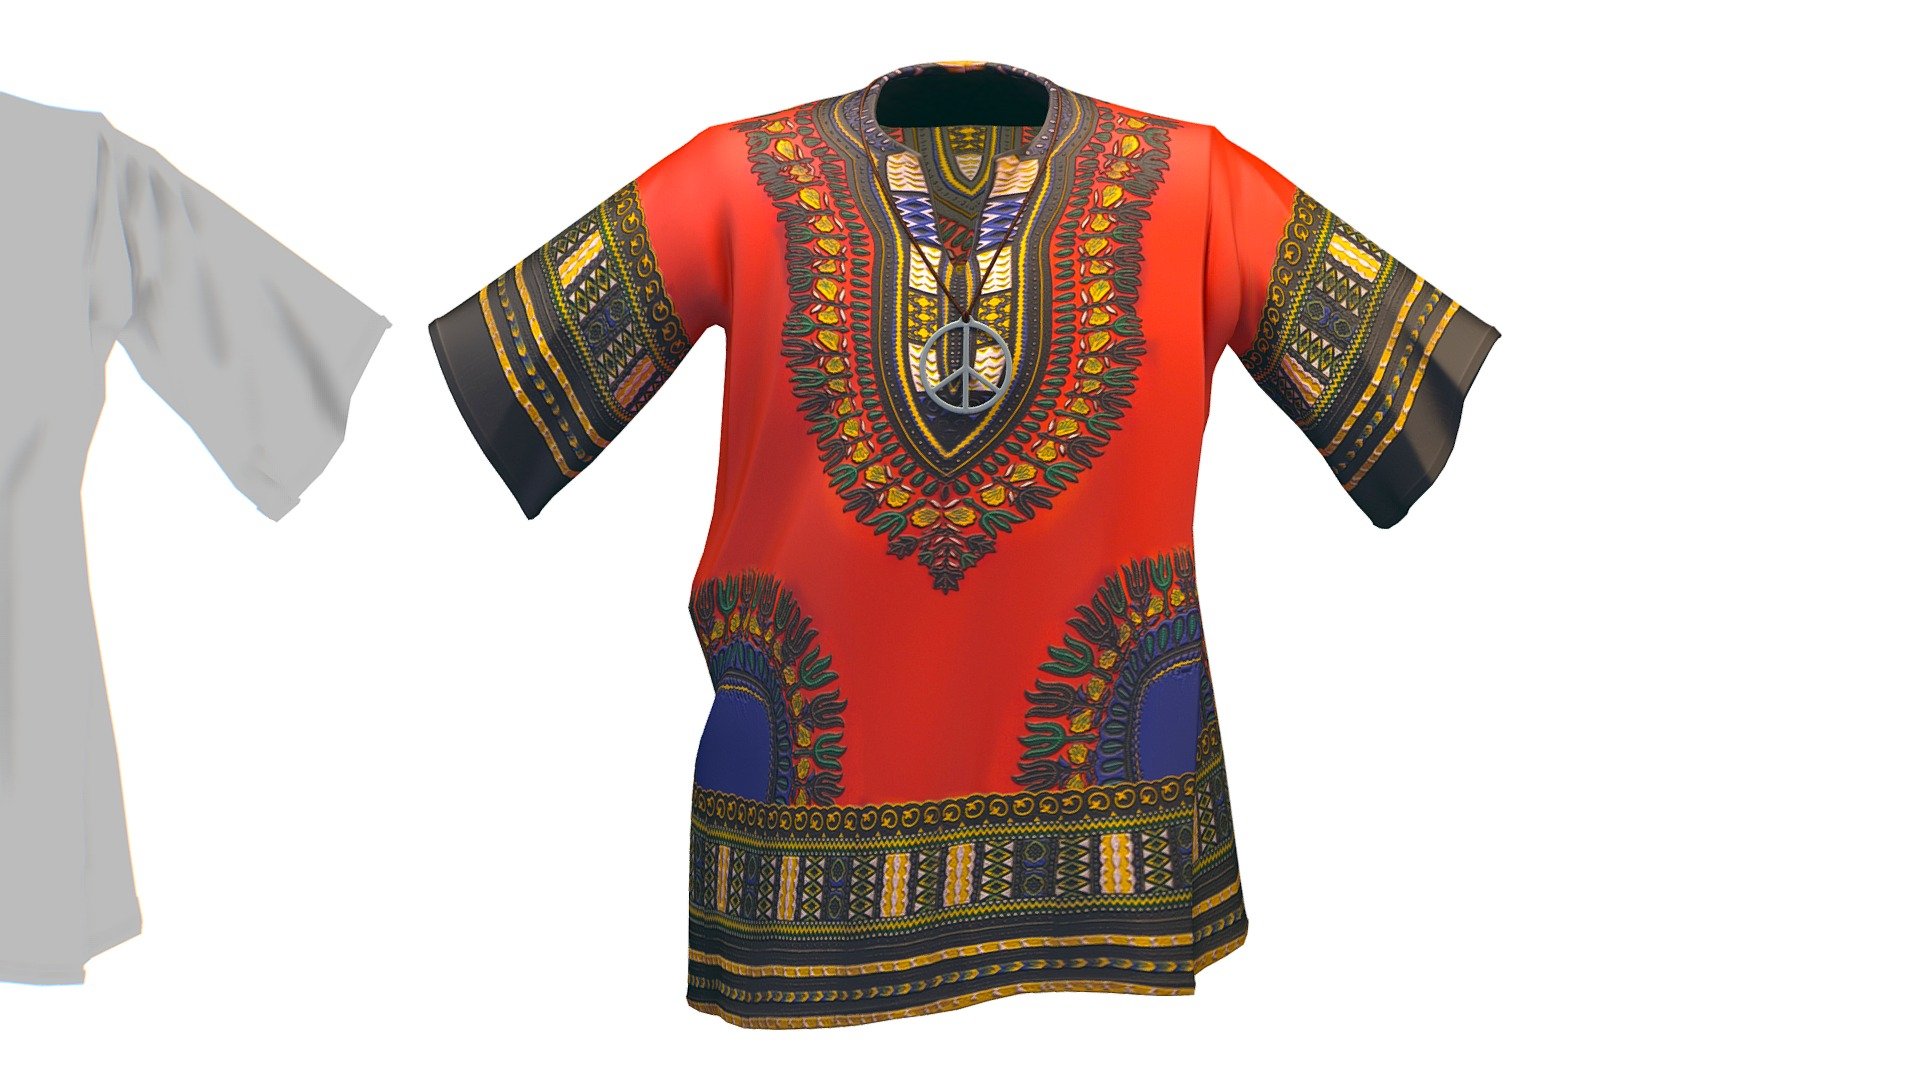 Cartoon High Poly Subdivision Hippie Shirt

No HDRI map, No Light, No material settings - only Diffuse/Color Map Texture (2500x2500)

More information about the 3D model: please use the Sketchfab Model Inspector - Key (i) - Cartoon High Poly Subdivision Hippie Shirt - Buy Royalty Free 3D model by Oleg Shuldiakov (@olegshuldiakov) 3d model